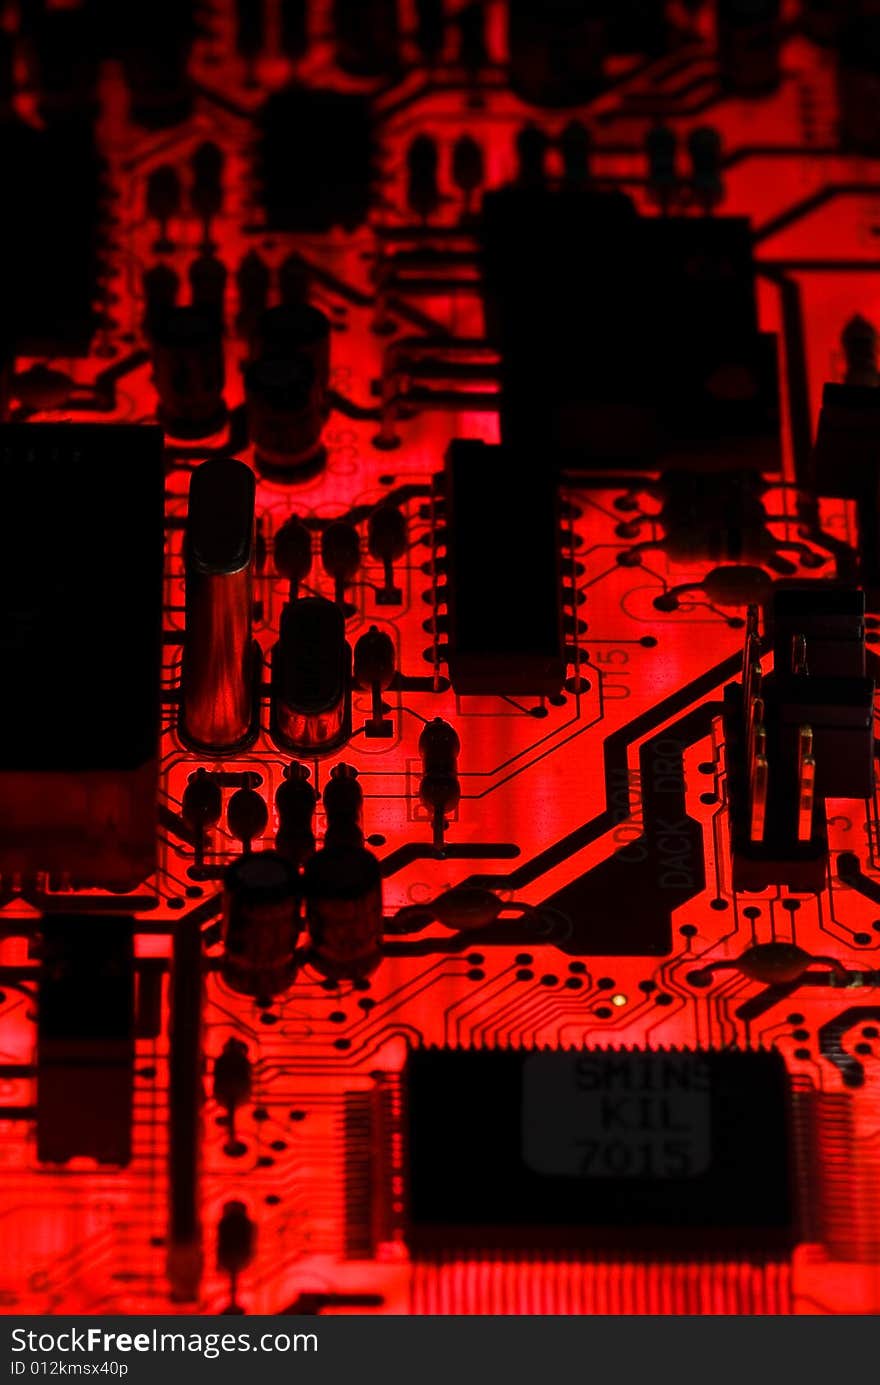 Red circuit board closeup lit from below through the board, creating a unique glow effect. Red circuit board closeup lit from below through the board, creating a unique glow effect.